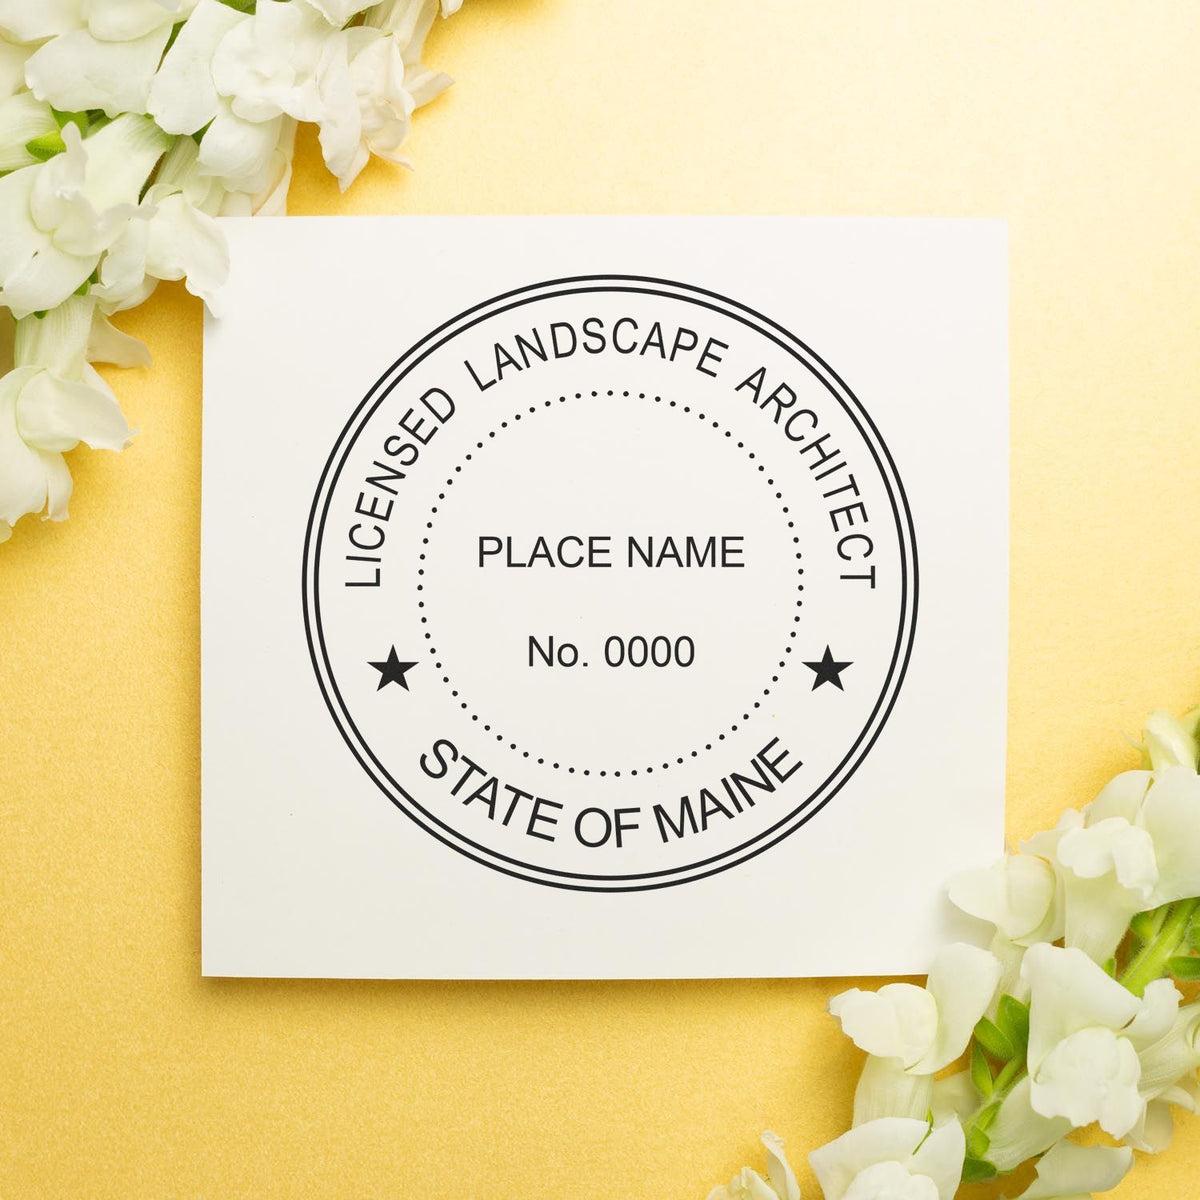 This paper is stamped with a sample imprint of the Slim Pre-Inked Maine Landscape Architect Seal Stamp, signifying its quality and reliability.